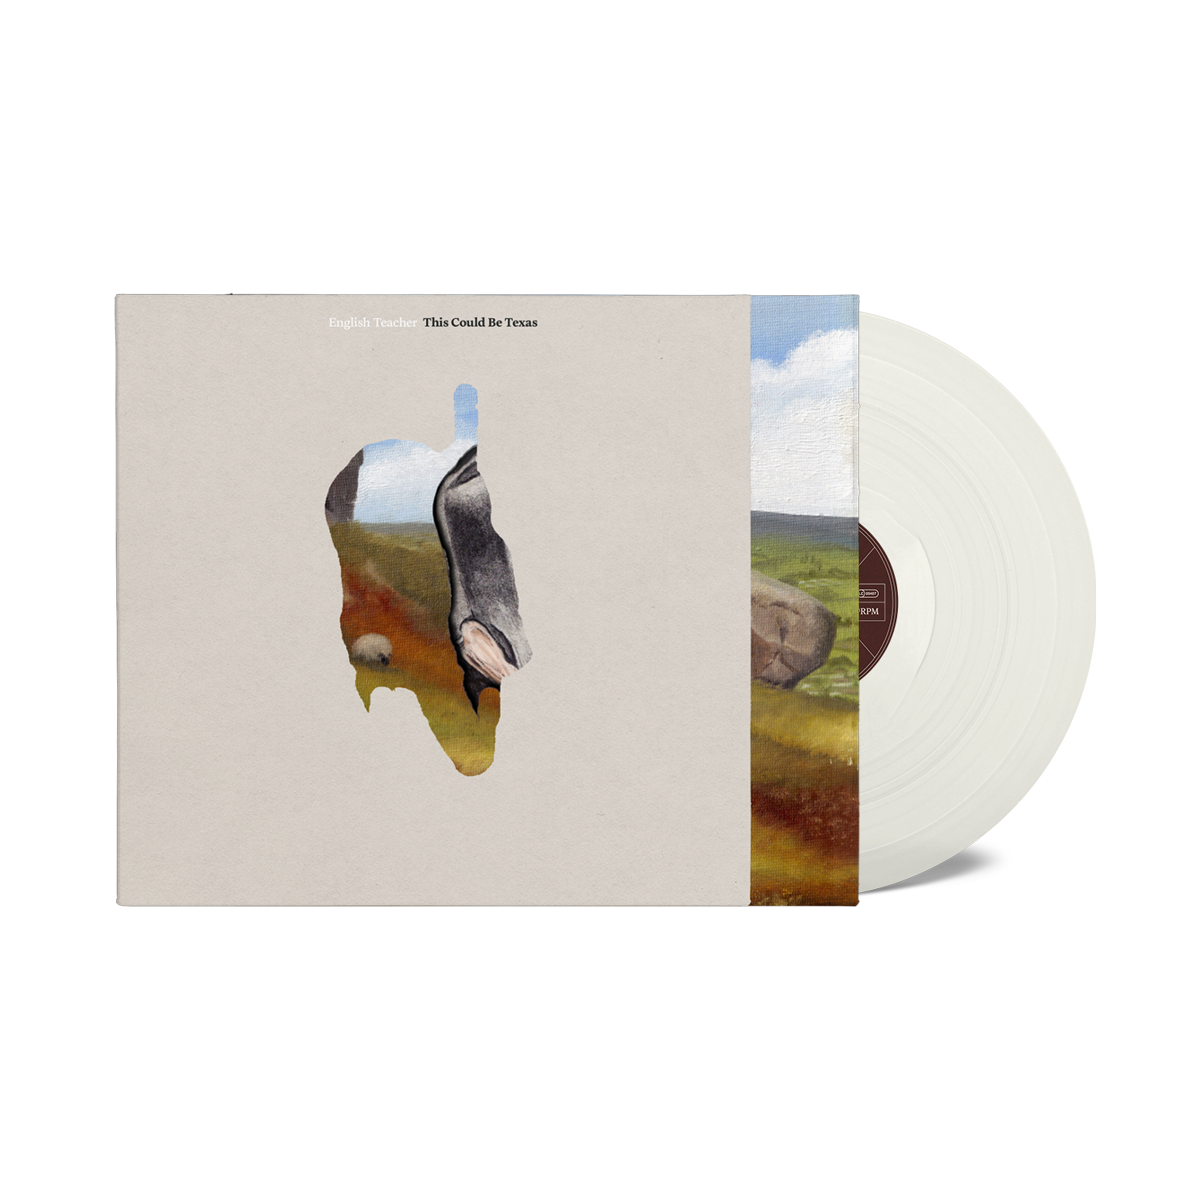 This Could be Texas: Limited Milky White Vinyl LP + Signed Art Card